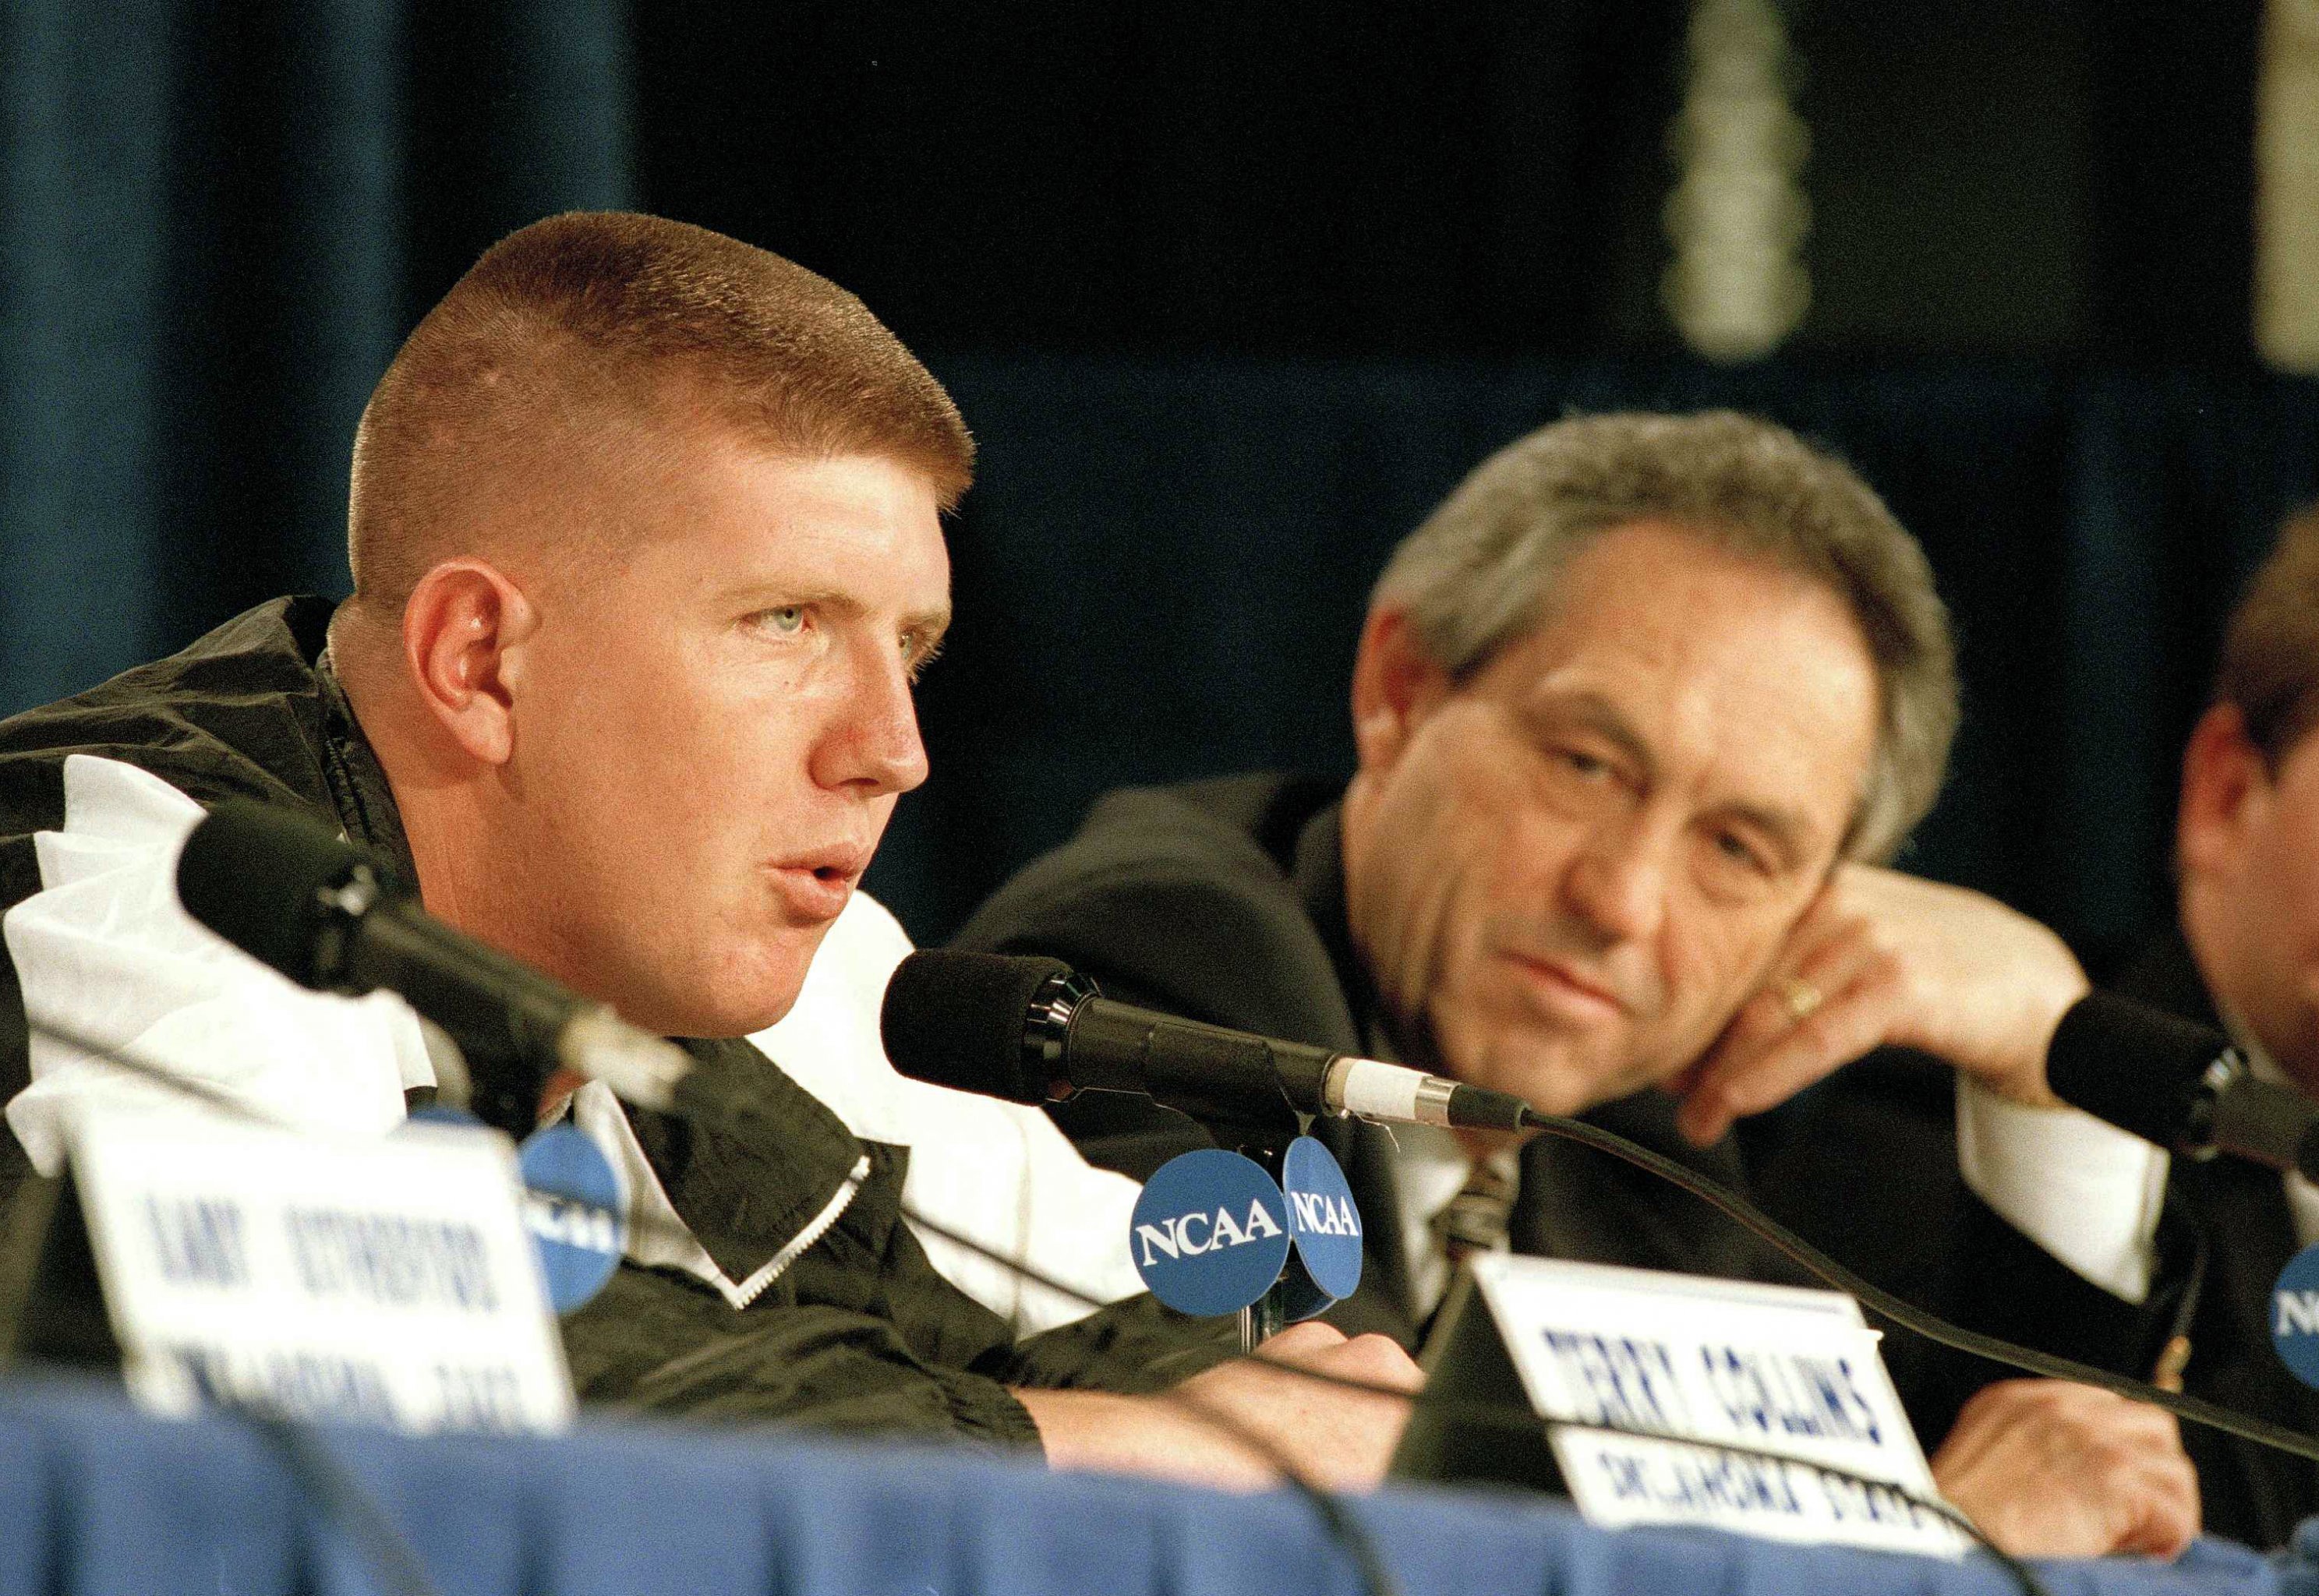 Gold: Bryant “Big Country” Reeves Didn't Last Long But He Was Fun -  Duke Basketball Report